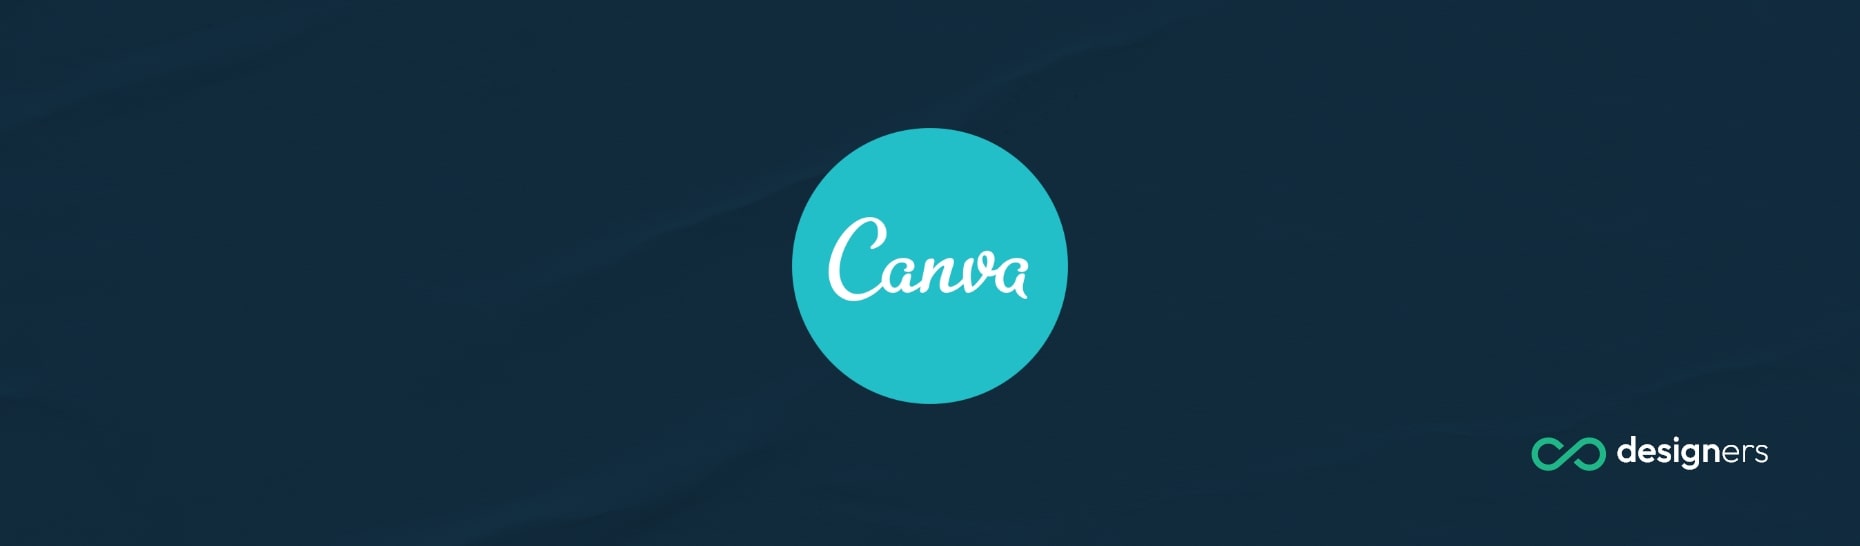 How Do I Add an Image Slot in Canva?